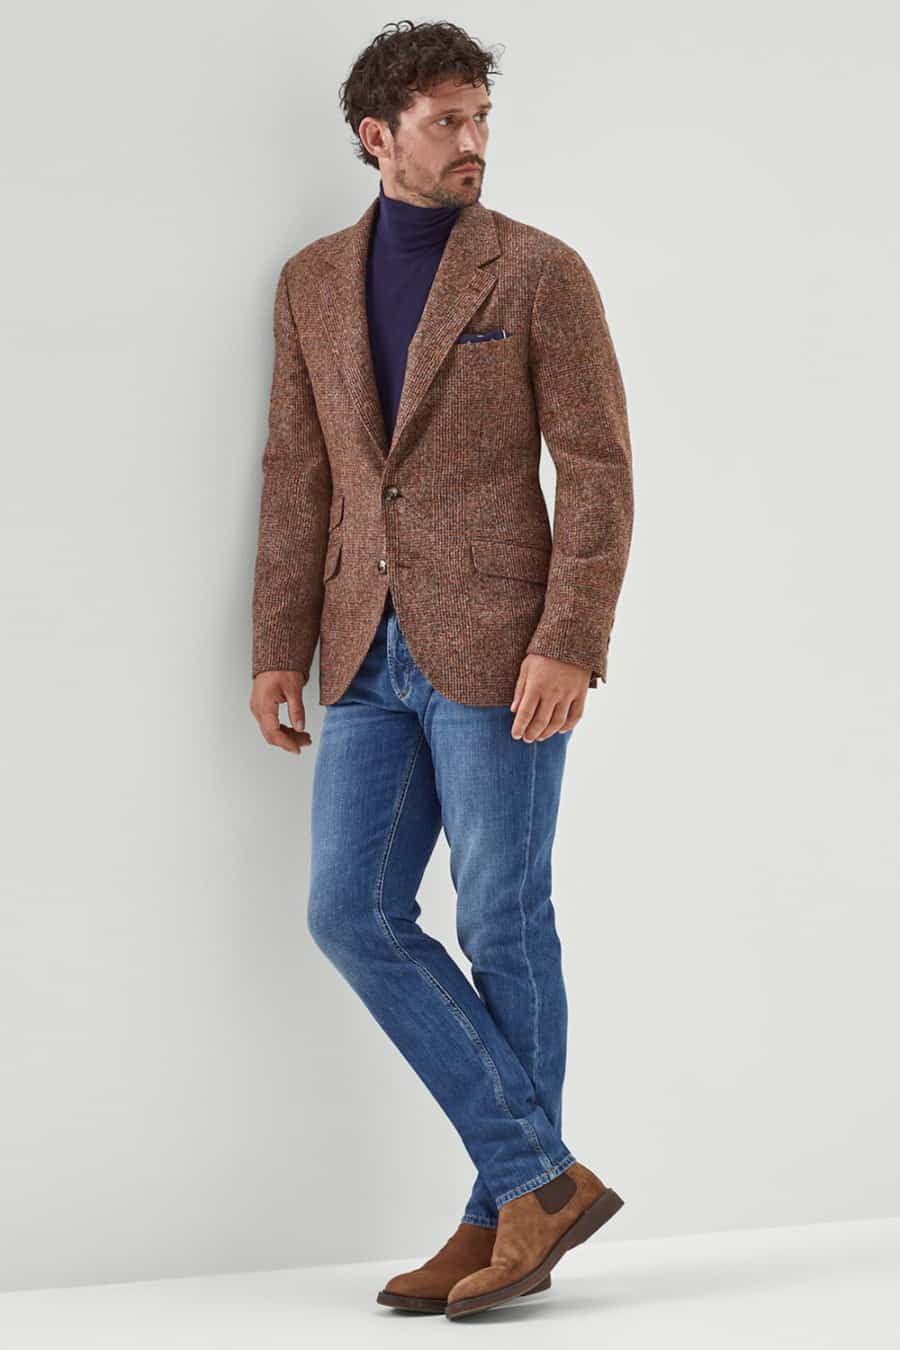 Men's stonewash jeans, navy turtleneck, brown wool blazer and brown suede Chelsea boots outfit